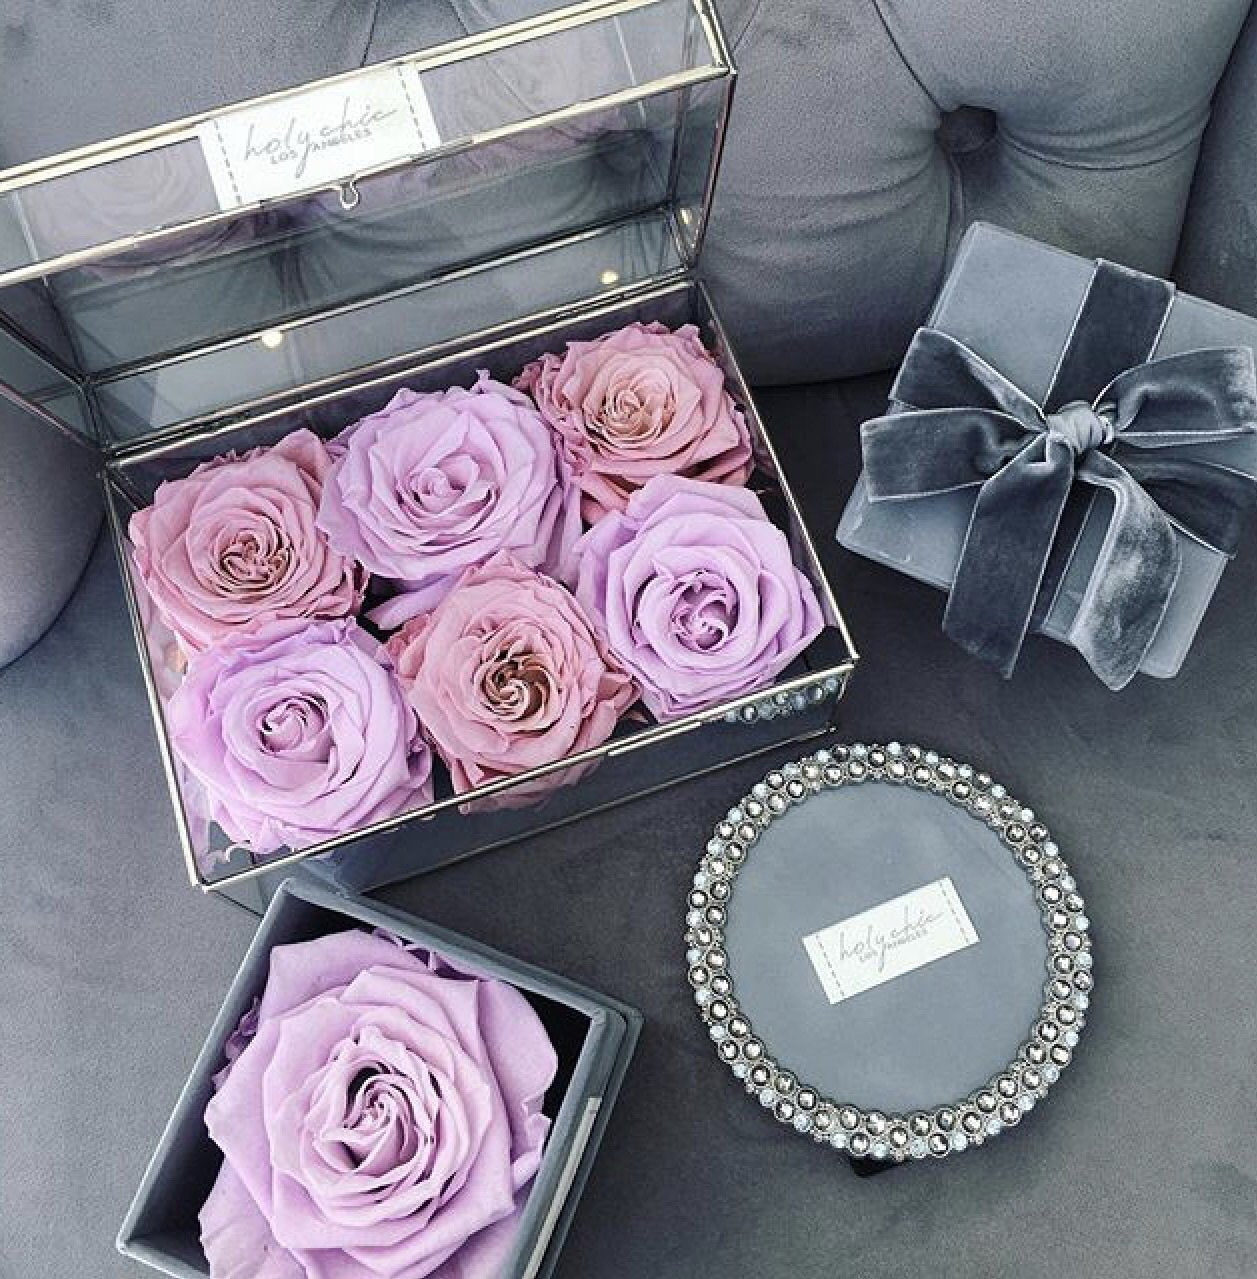 Preserved roses in a rectangular glass box